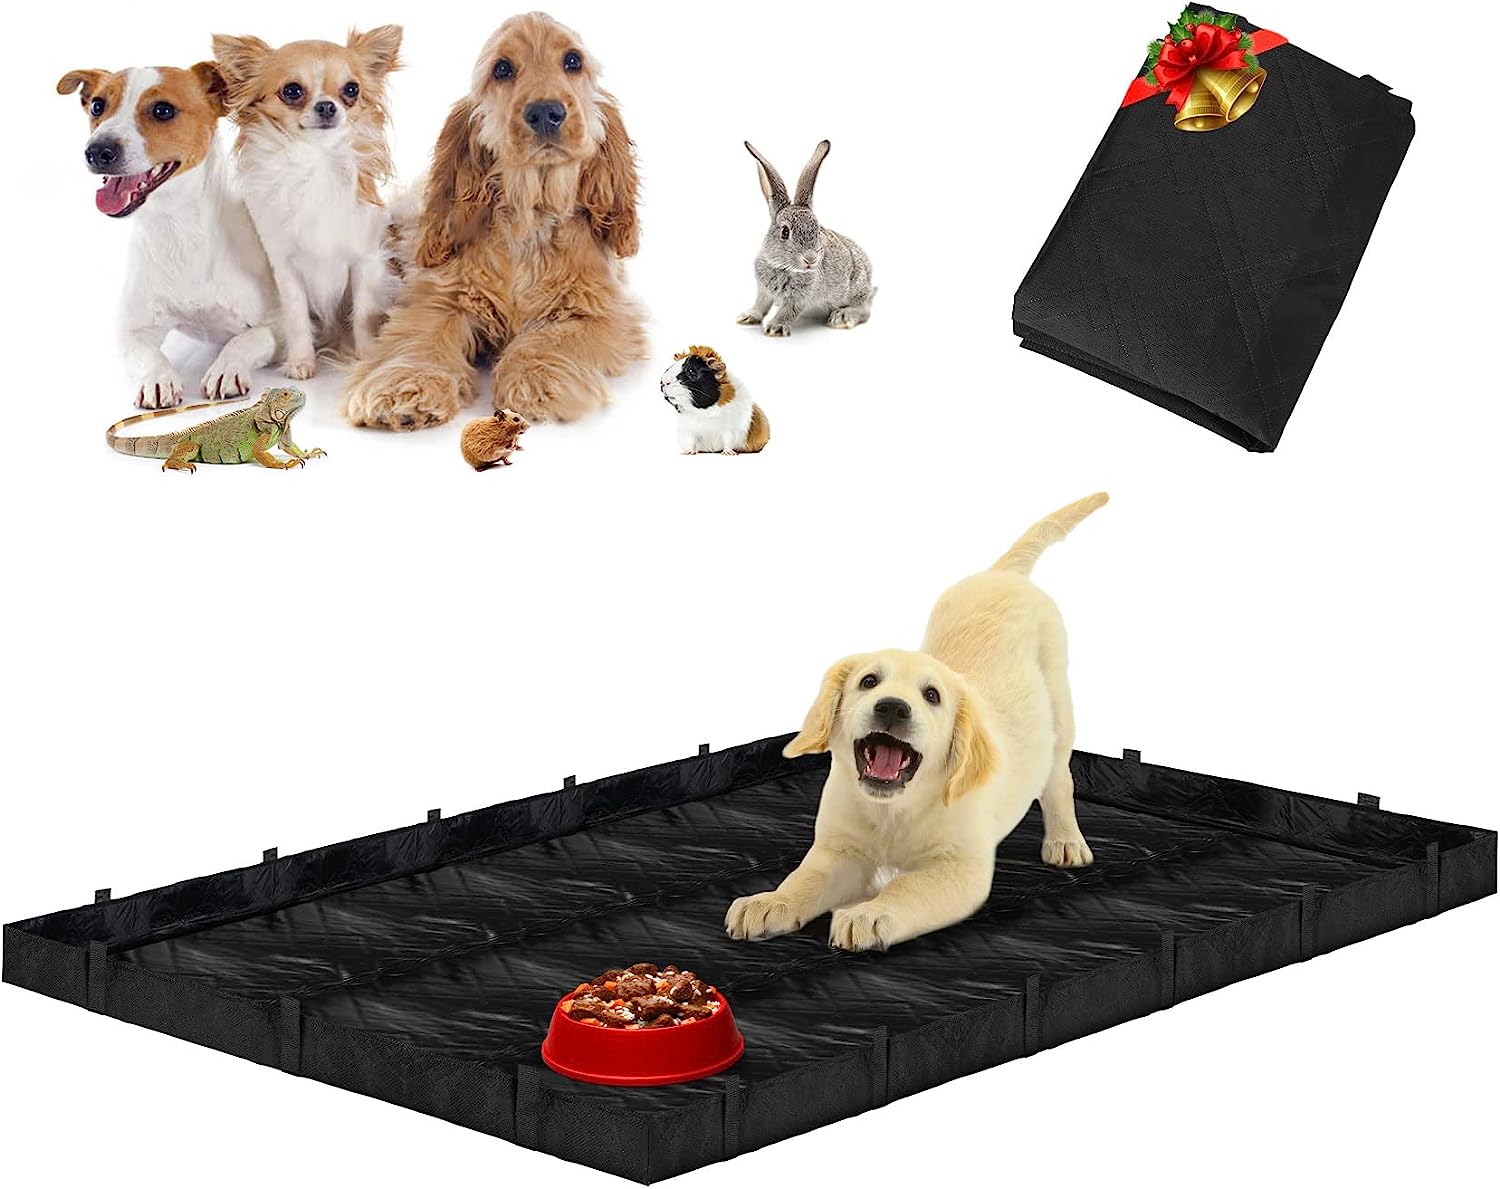 Crate Mats for Small Animals, BEYOUNG GOG Training Pee [...]